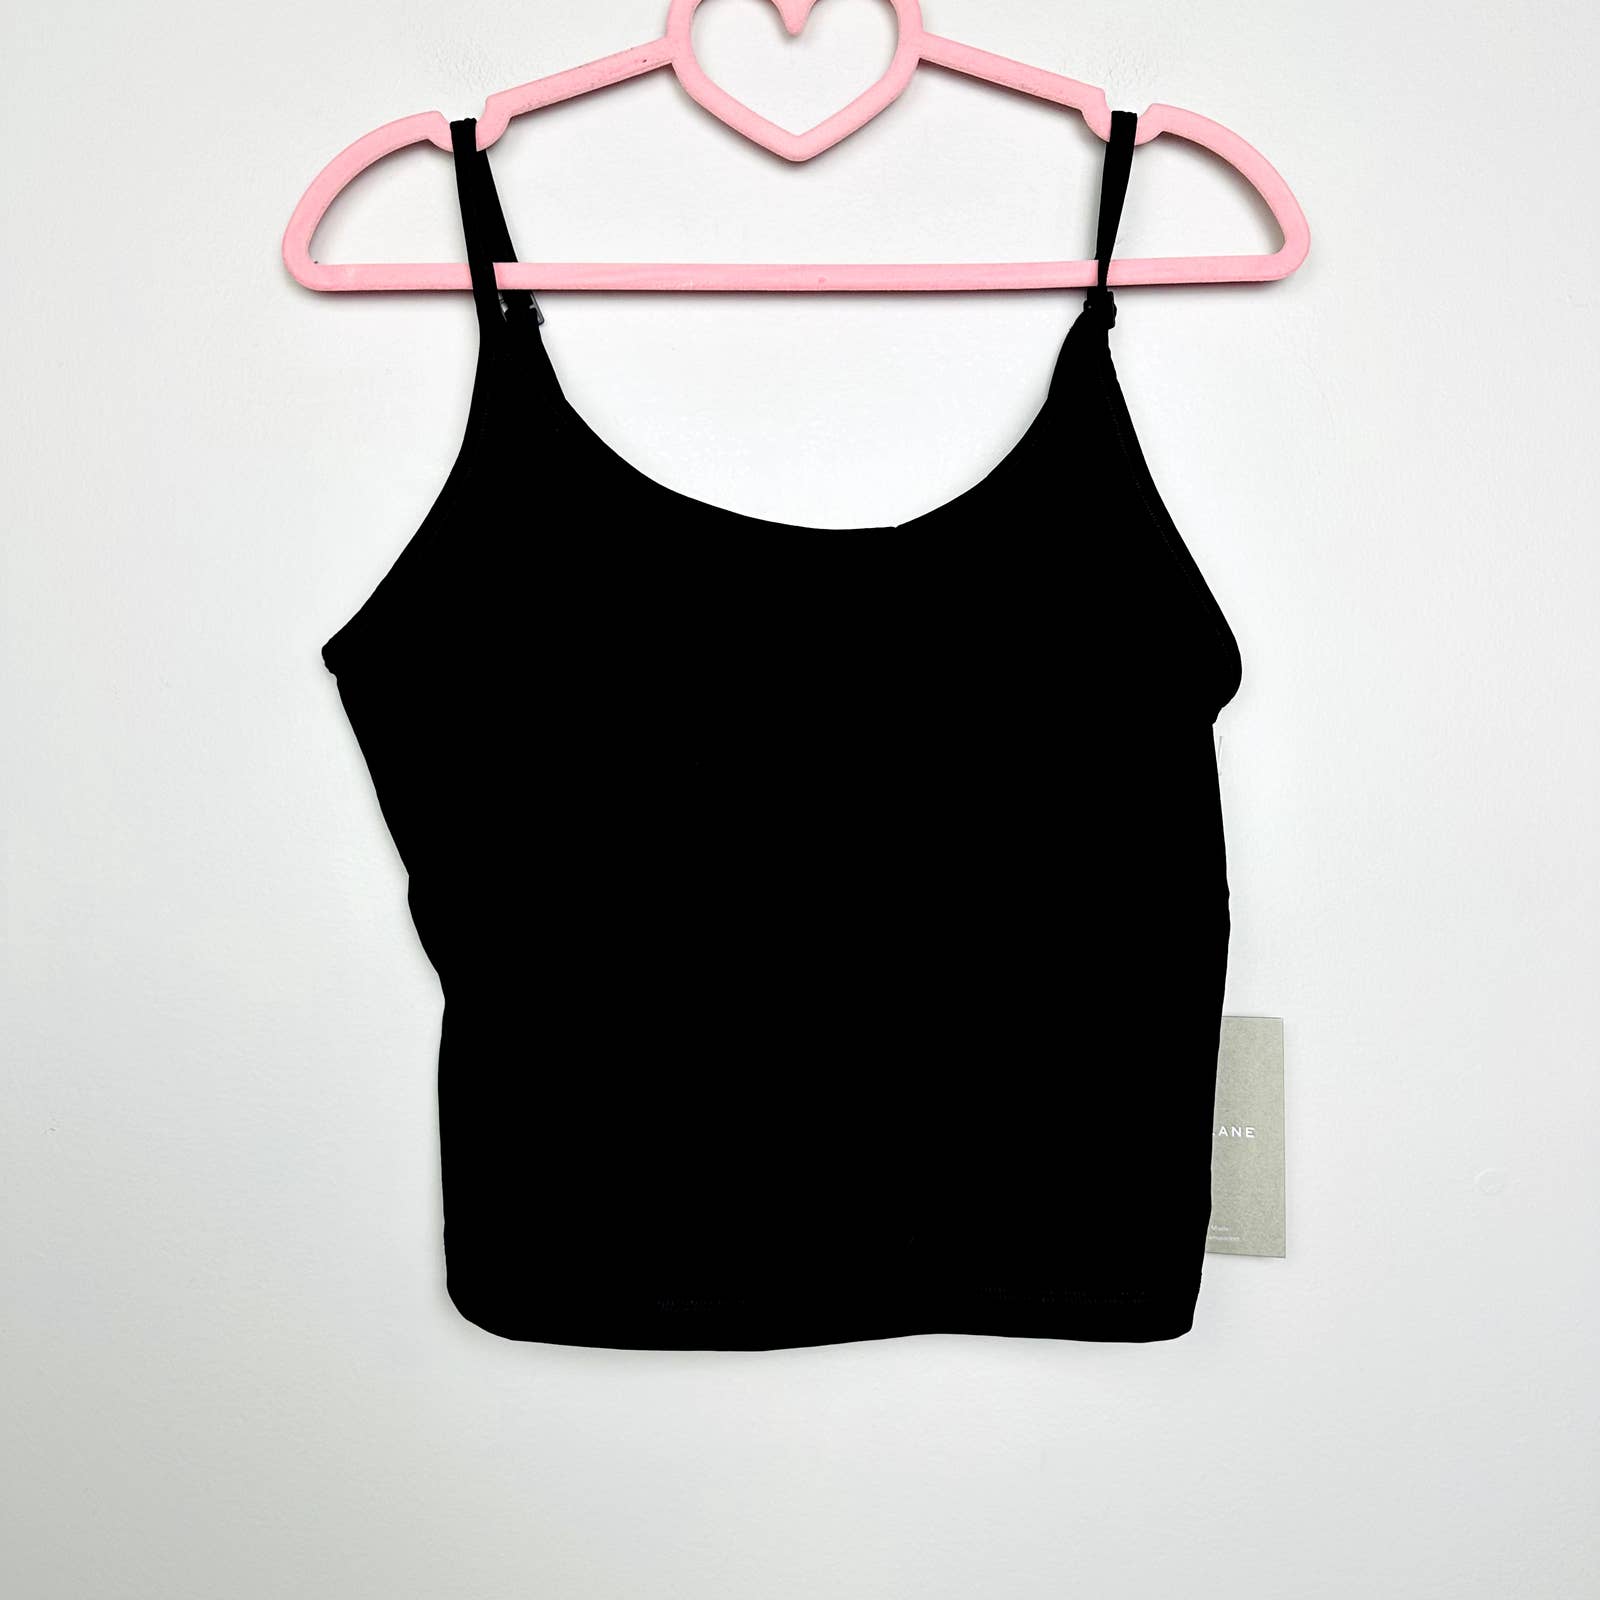 Everlane NWT The Perform Cami Scoop Neck Gym Cropped Tank Top Black Size Medium